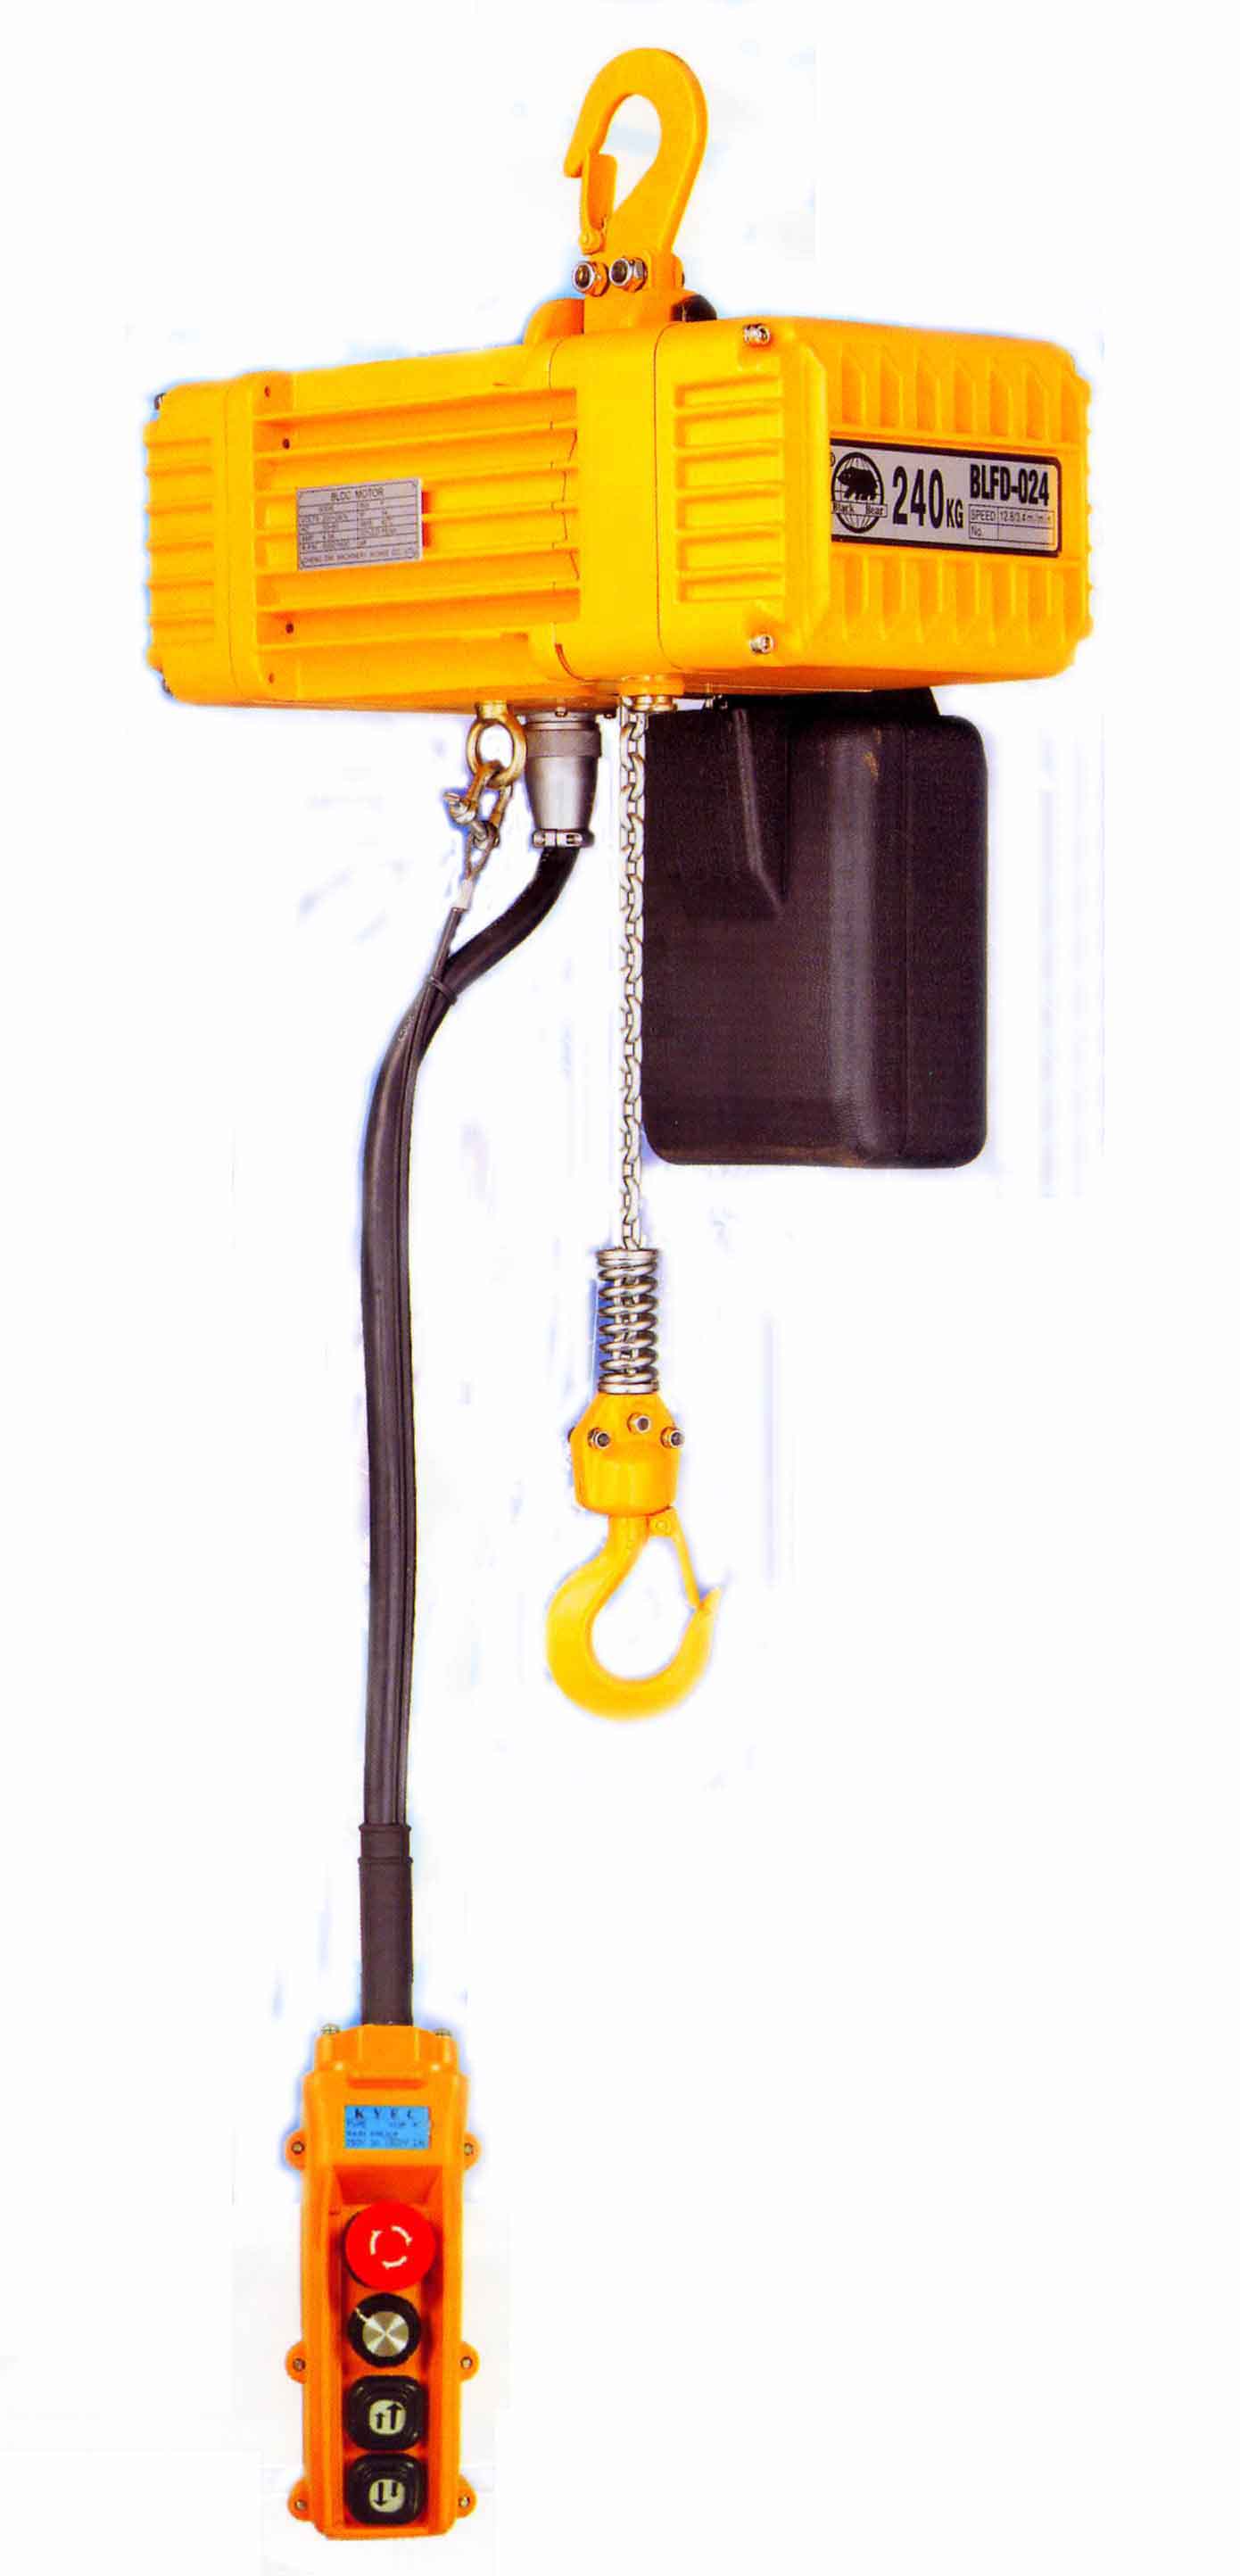 Cheng Day supplies energy-saving electric chain hoists.